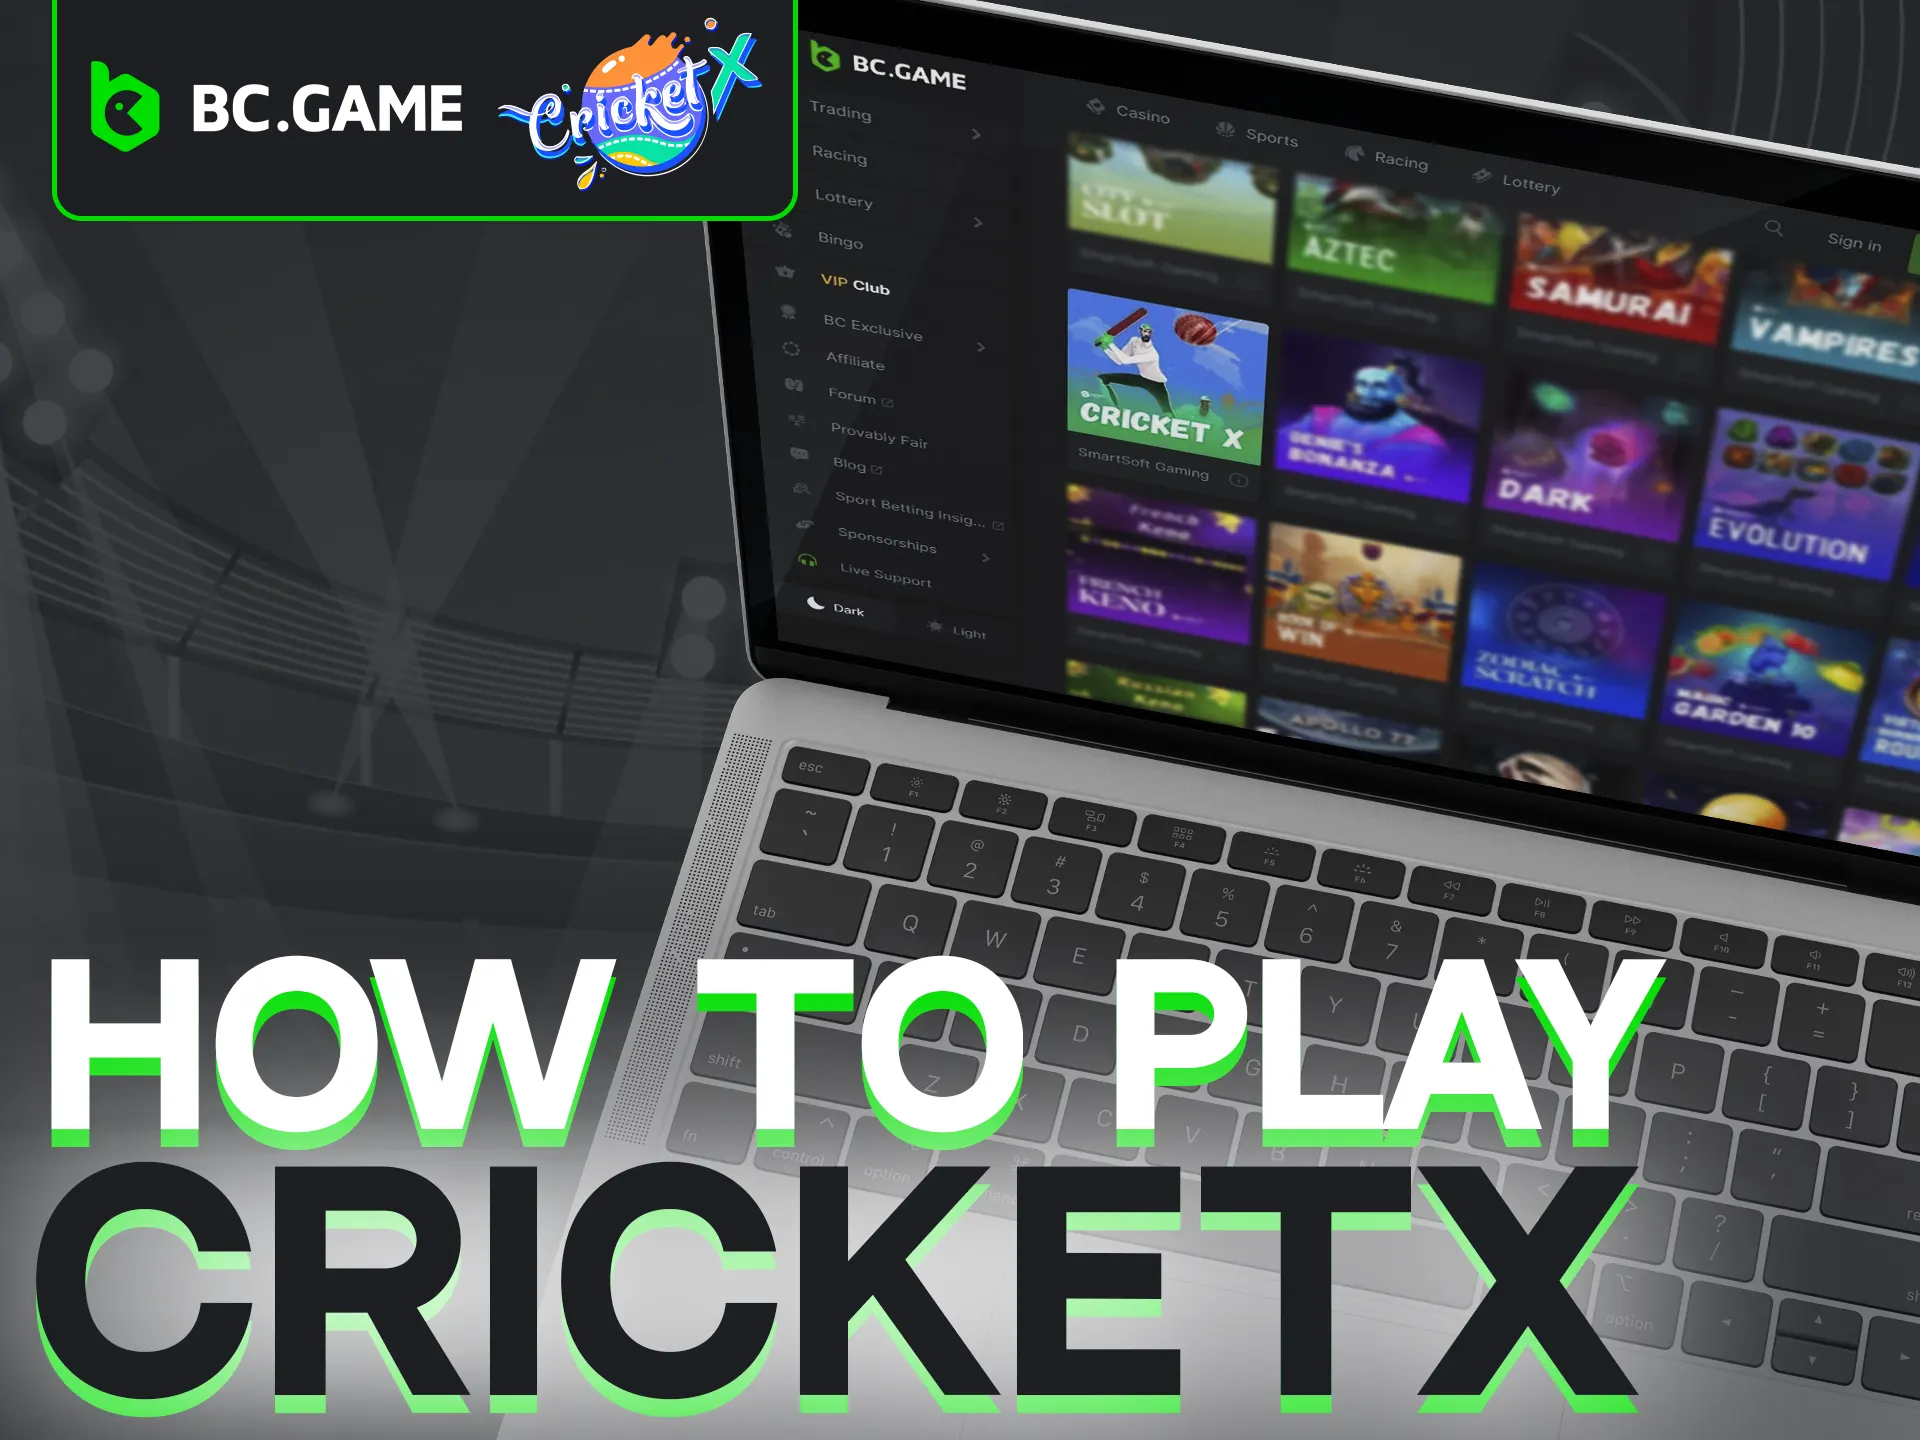 Bet wisely on Cricket X at BC Game for big wins.